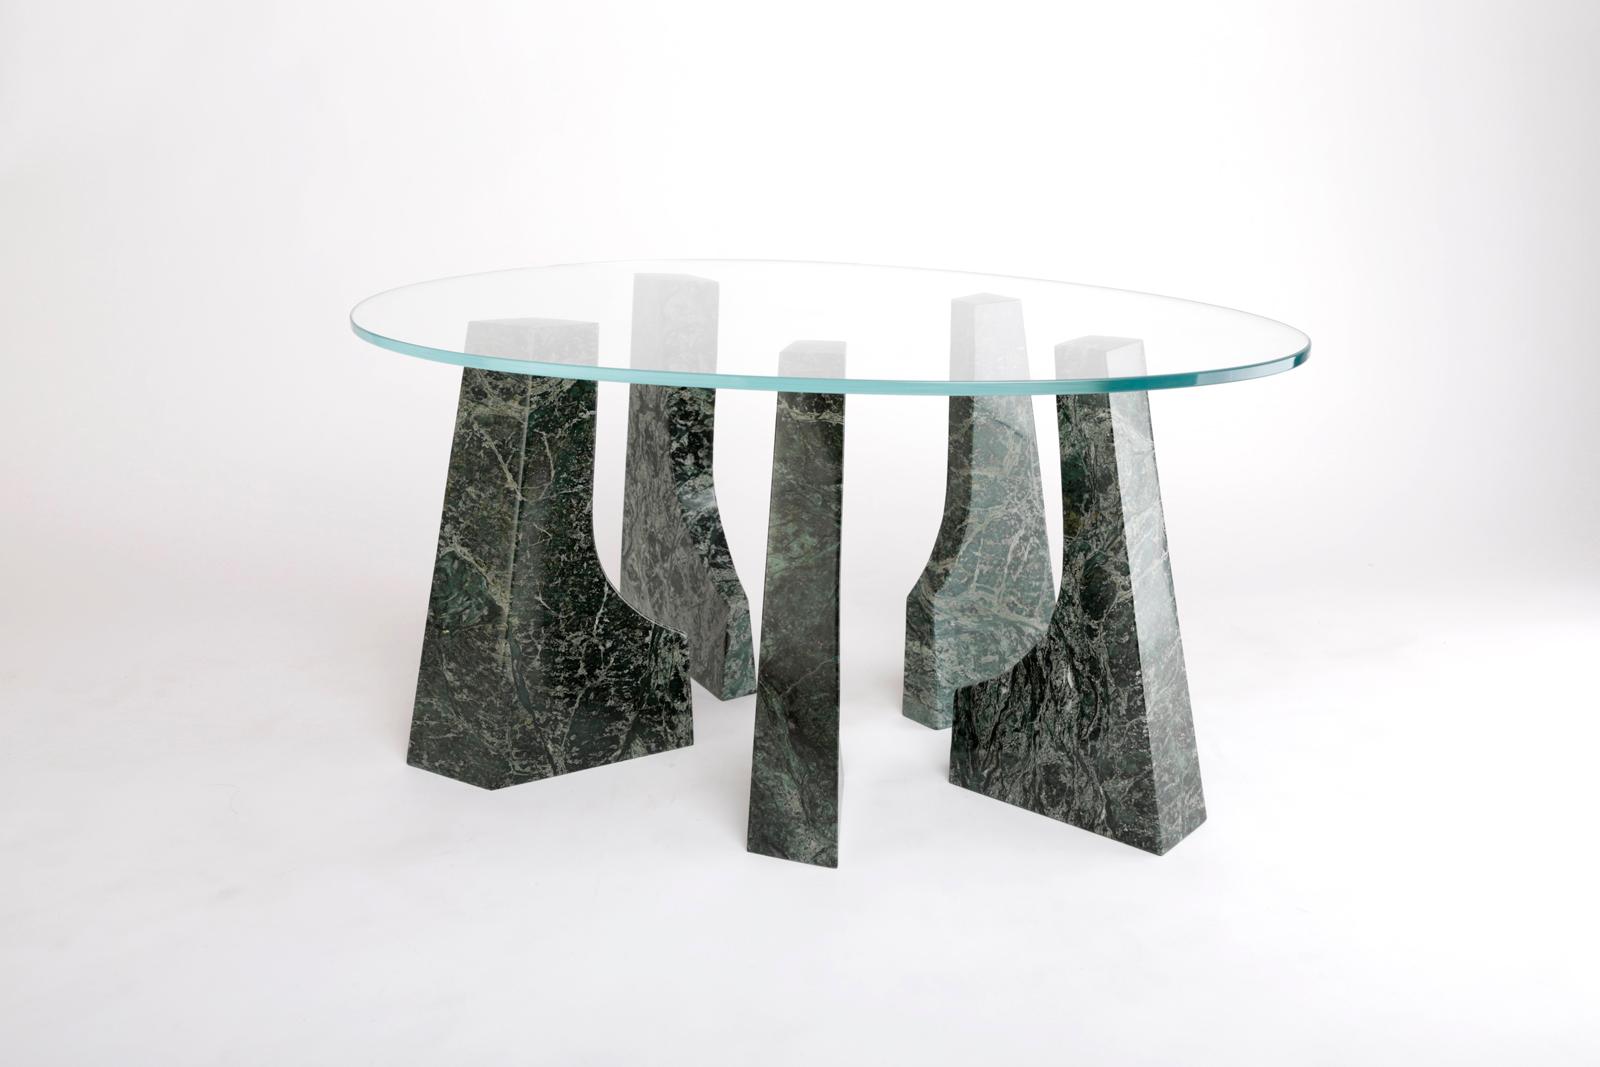 Trama coffee table by Comité de Proyectos
Dimensions: 80 x 52 x H 38 cm
Materials: Green Tikal marble, 9mm tempered glass

The Trama Baja table is inspired by CU's sculptural space, adding a glass top to the loose pieces that allows to discover